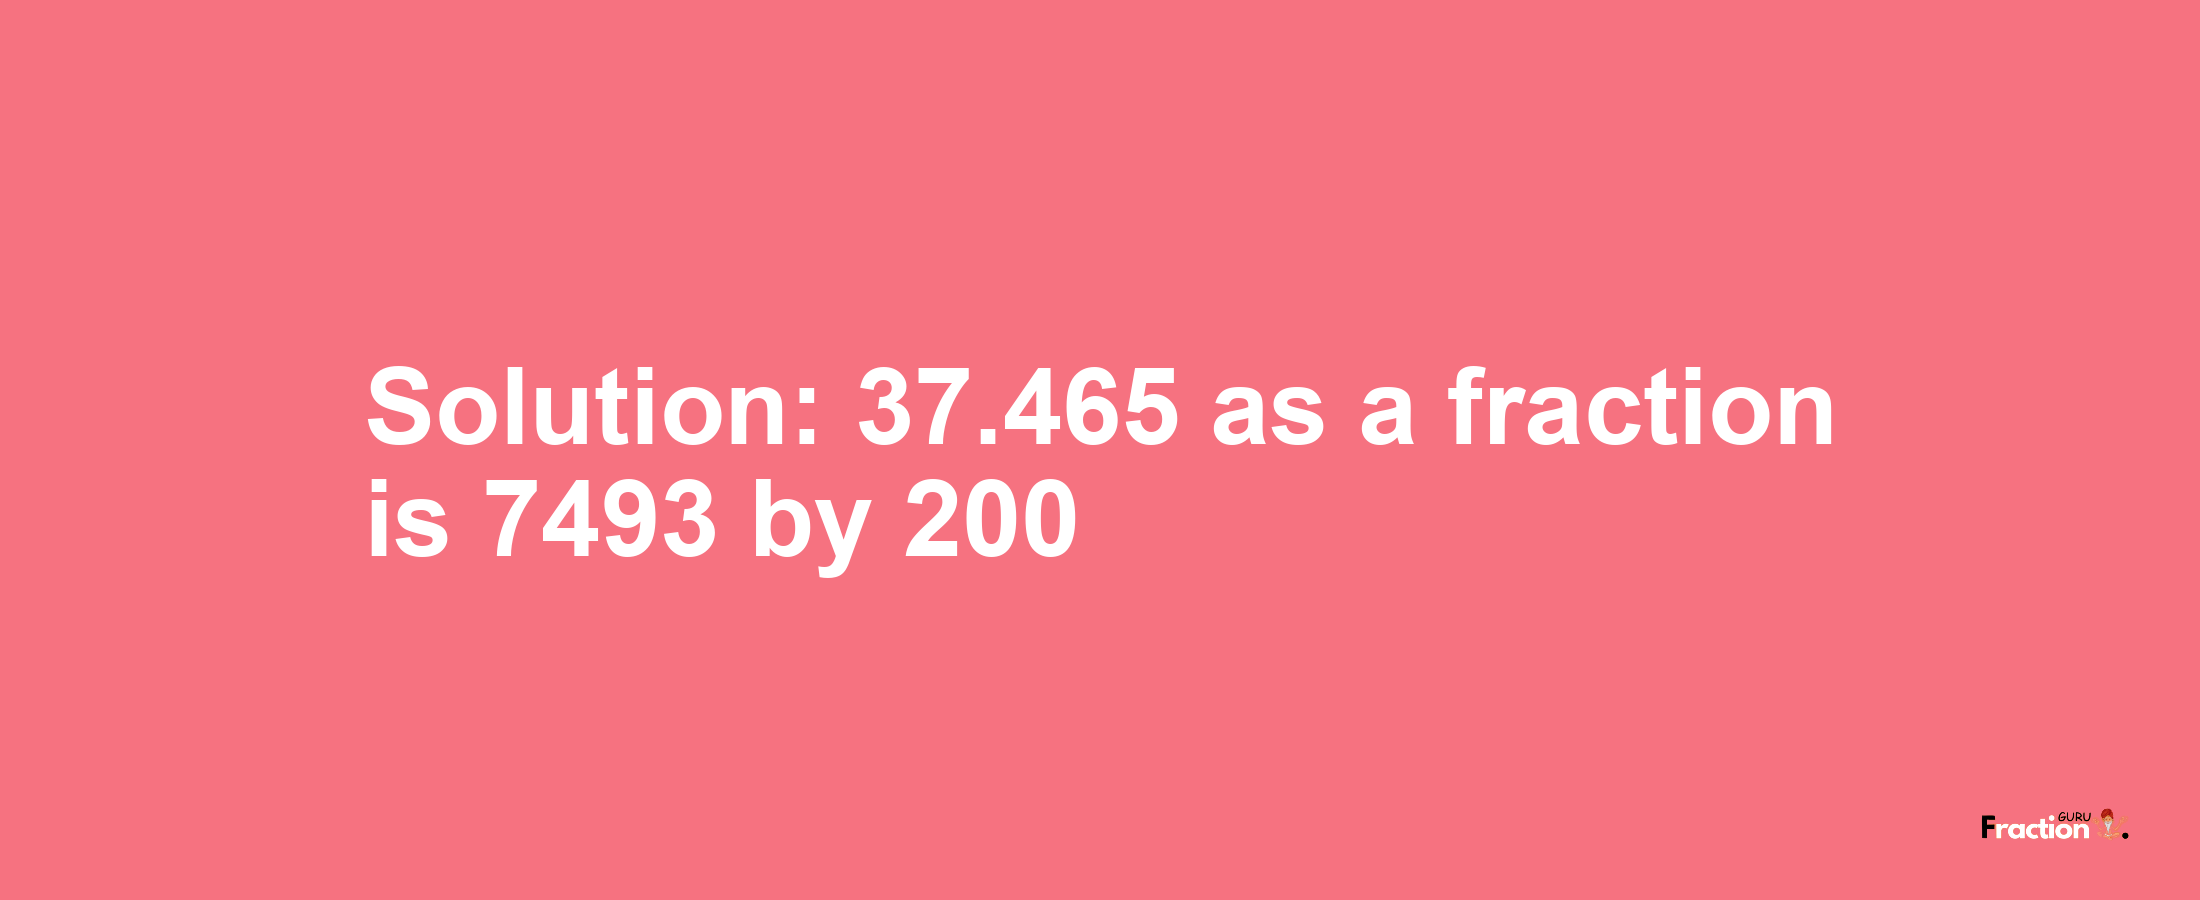 Solution:37.465 as a fraction is 7493/200